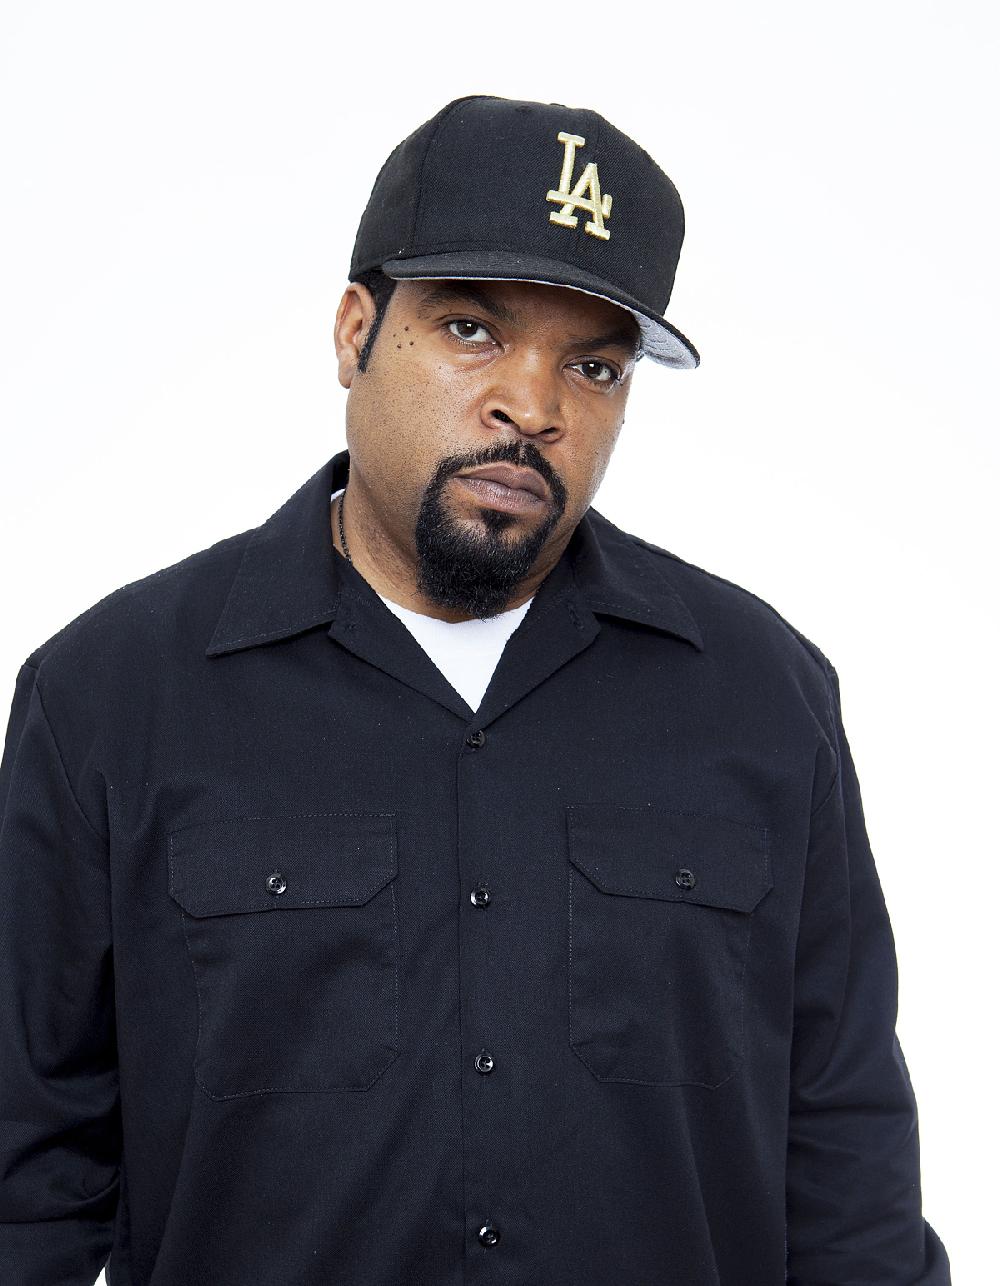 Ice Cube joins roster of Musicfest headliners